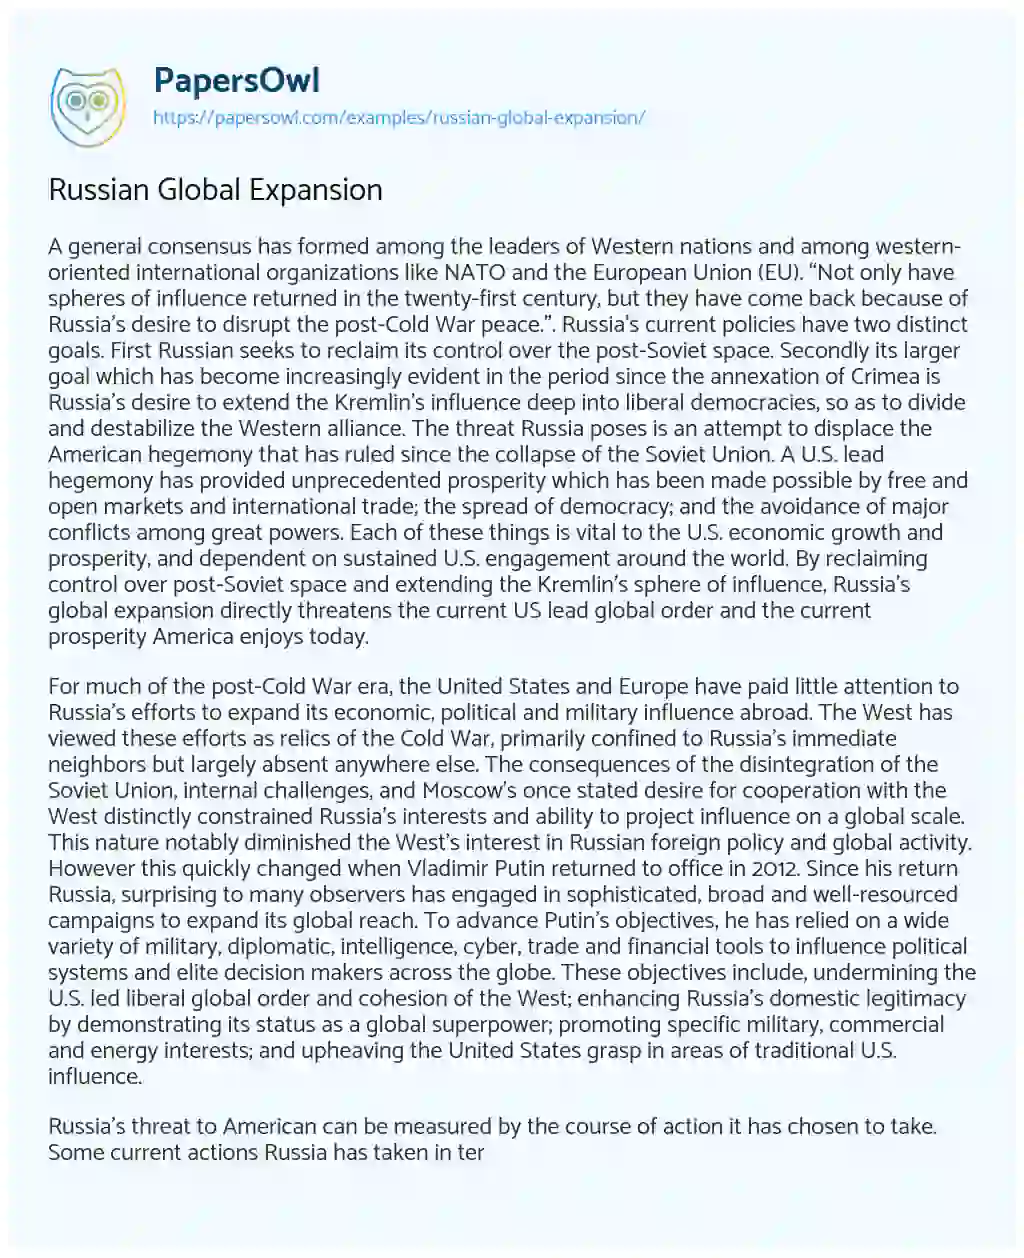 Russian Global Expansion essay